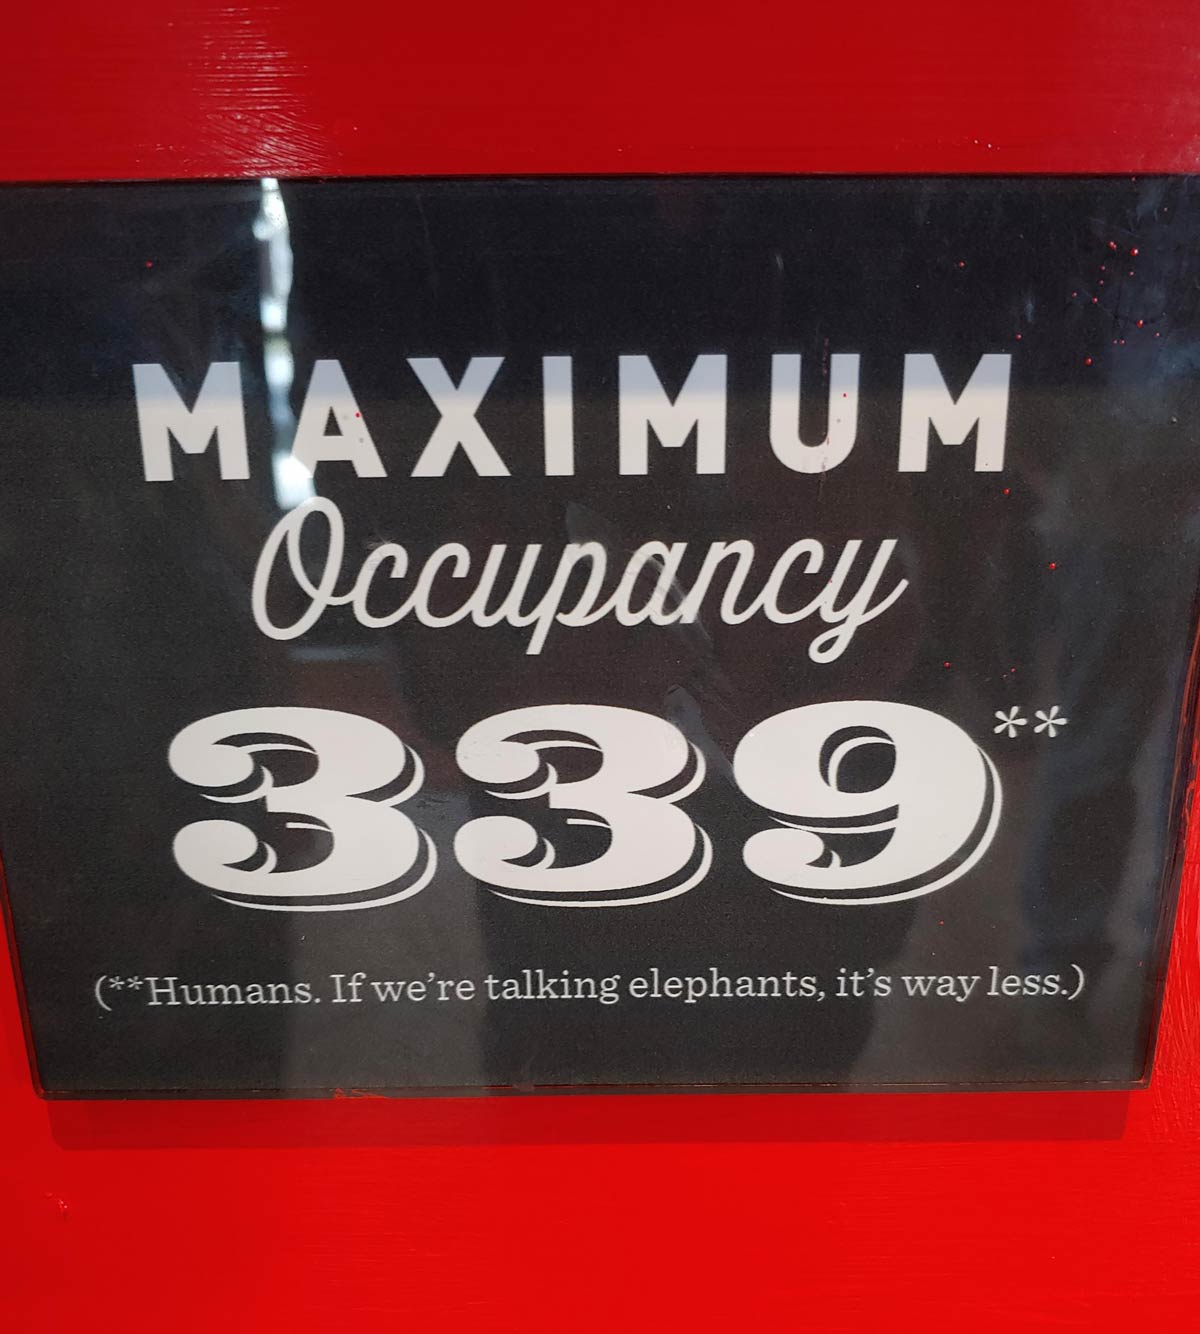 This occupancy sign at my local Red Robins